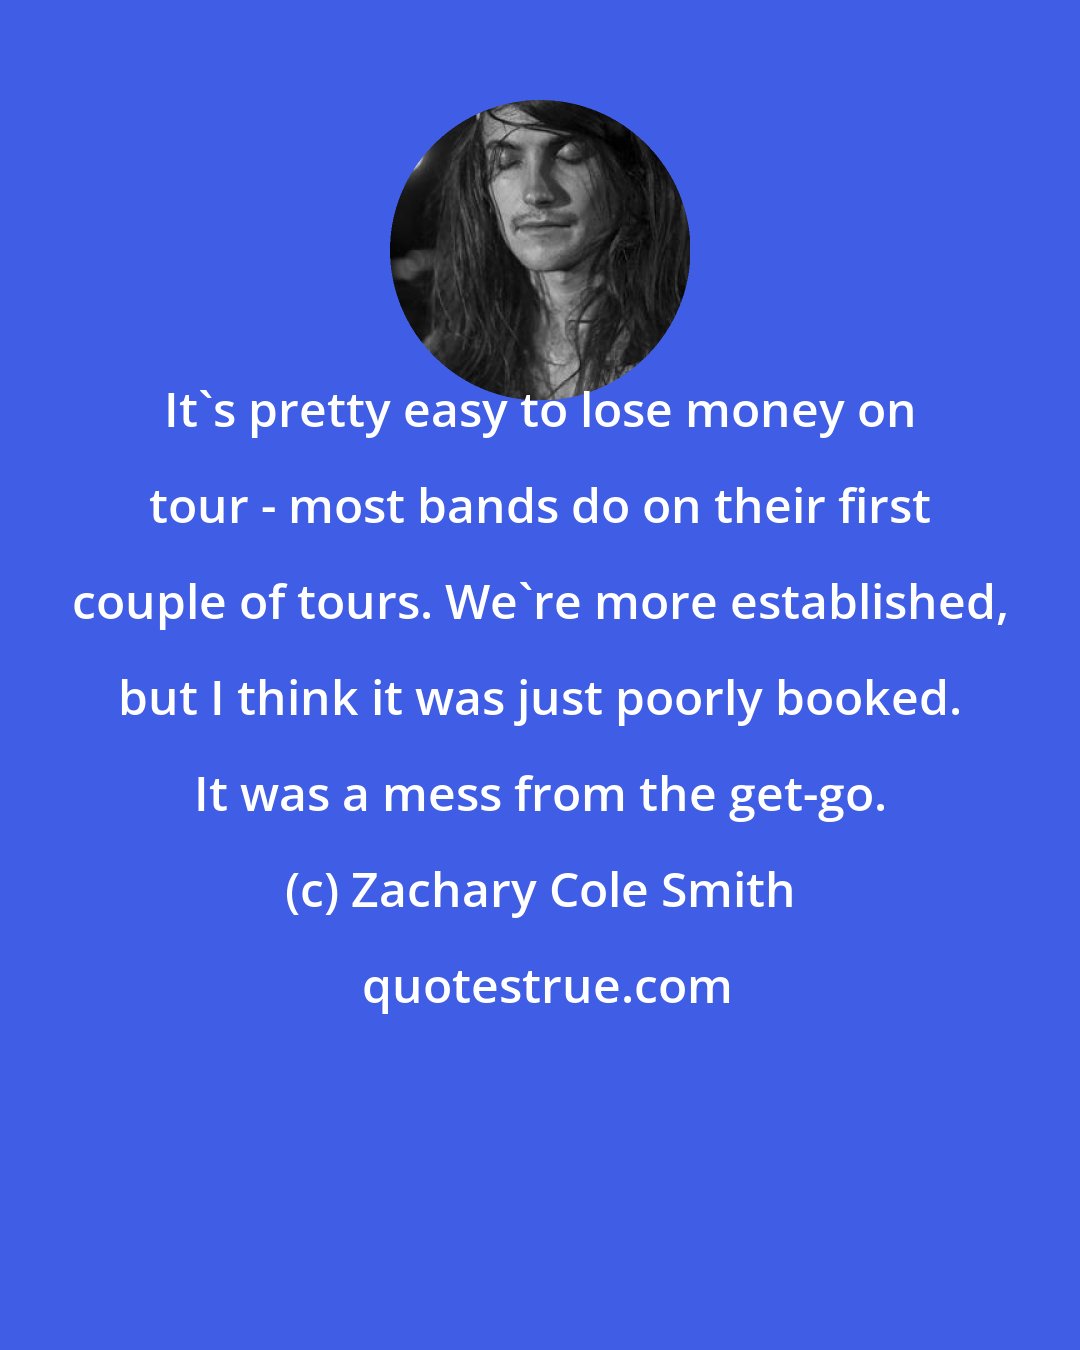 Zachary Cole Smith: It's pretty easy to lose money on tour - most bands do on their first couple of tours. We're more established, but I think it was just poorly booked. It was a mess from the get-go.